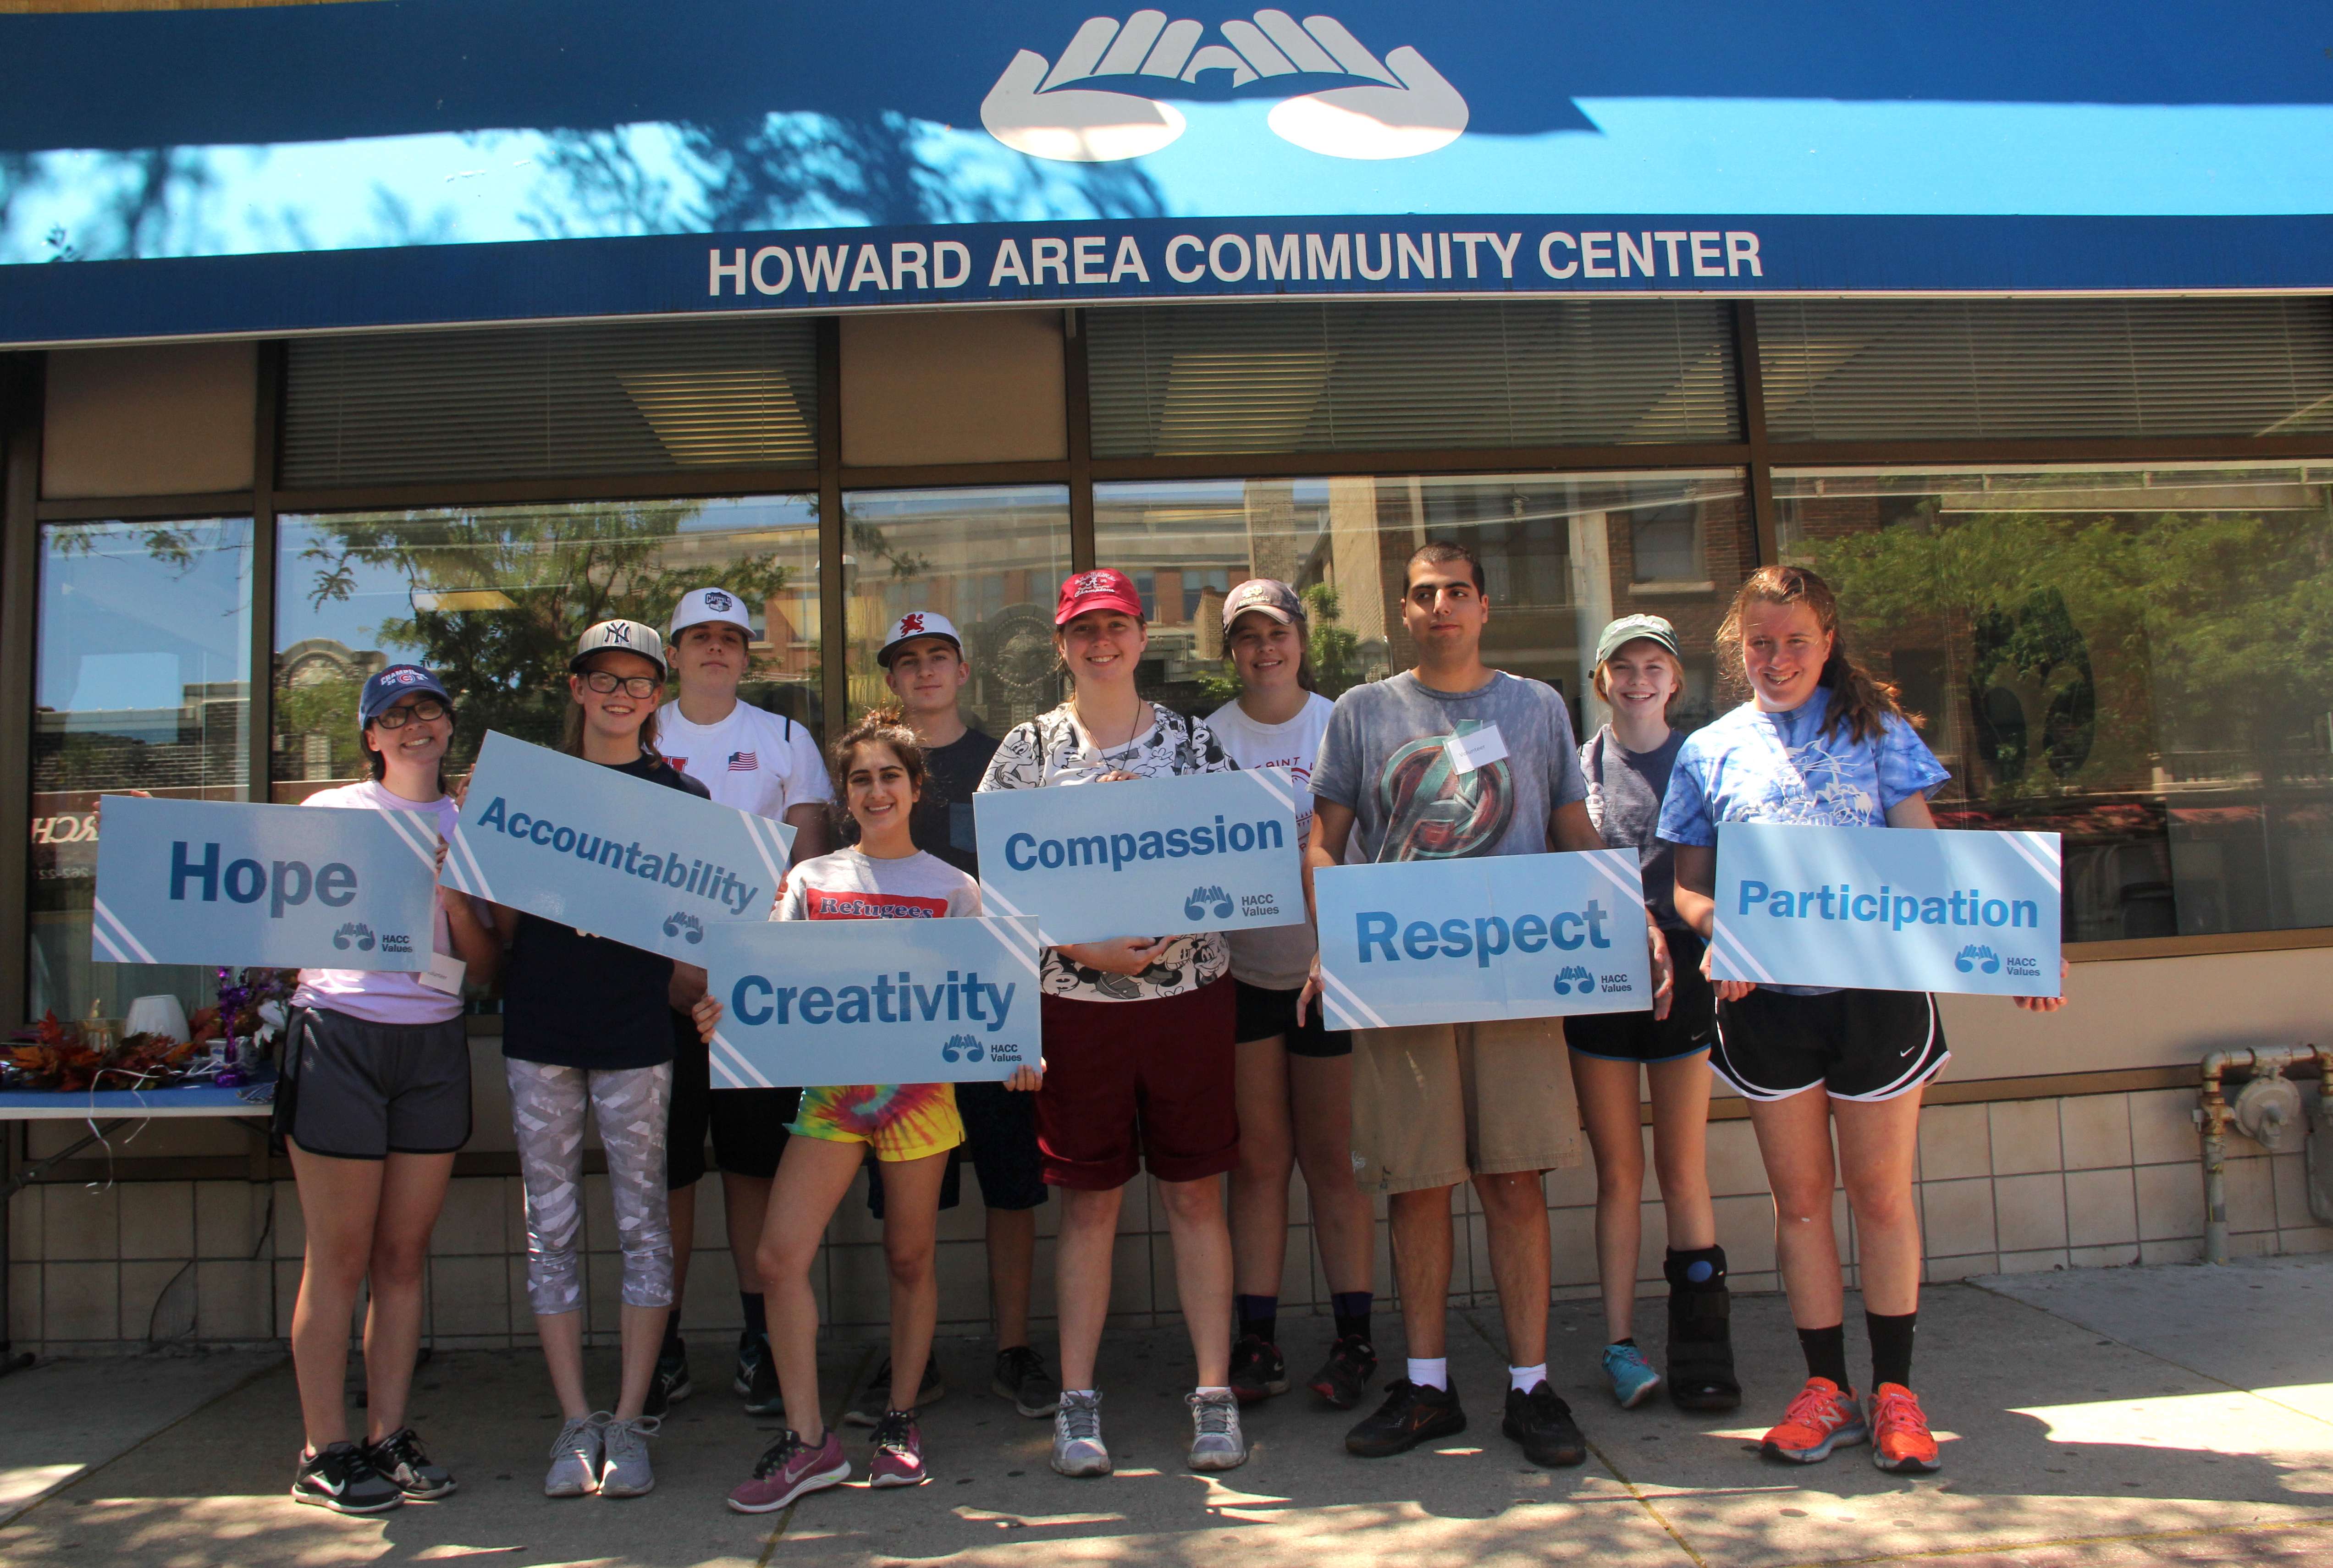 Howard and Evanston Community Center provides empowers individuals, enabling their independence and offering a better chance for a brighter tomorrow.